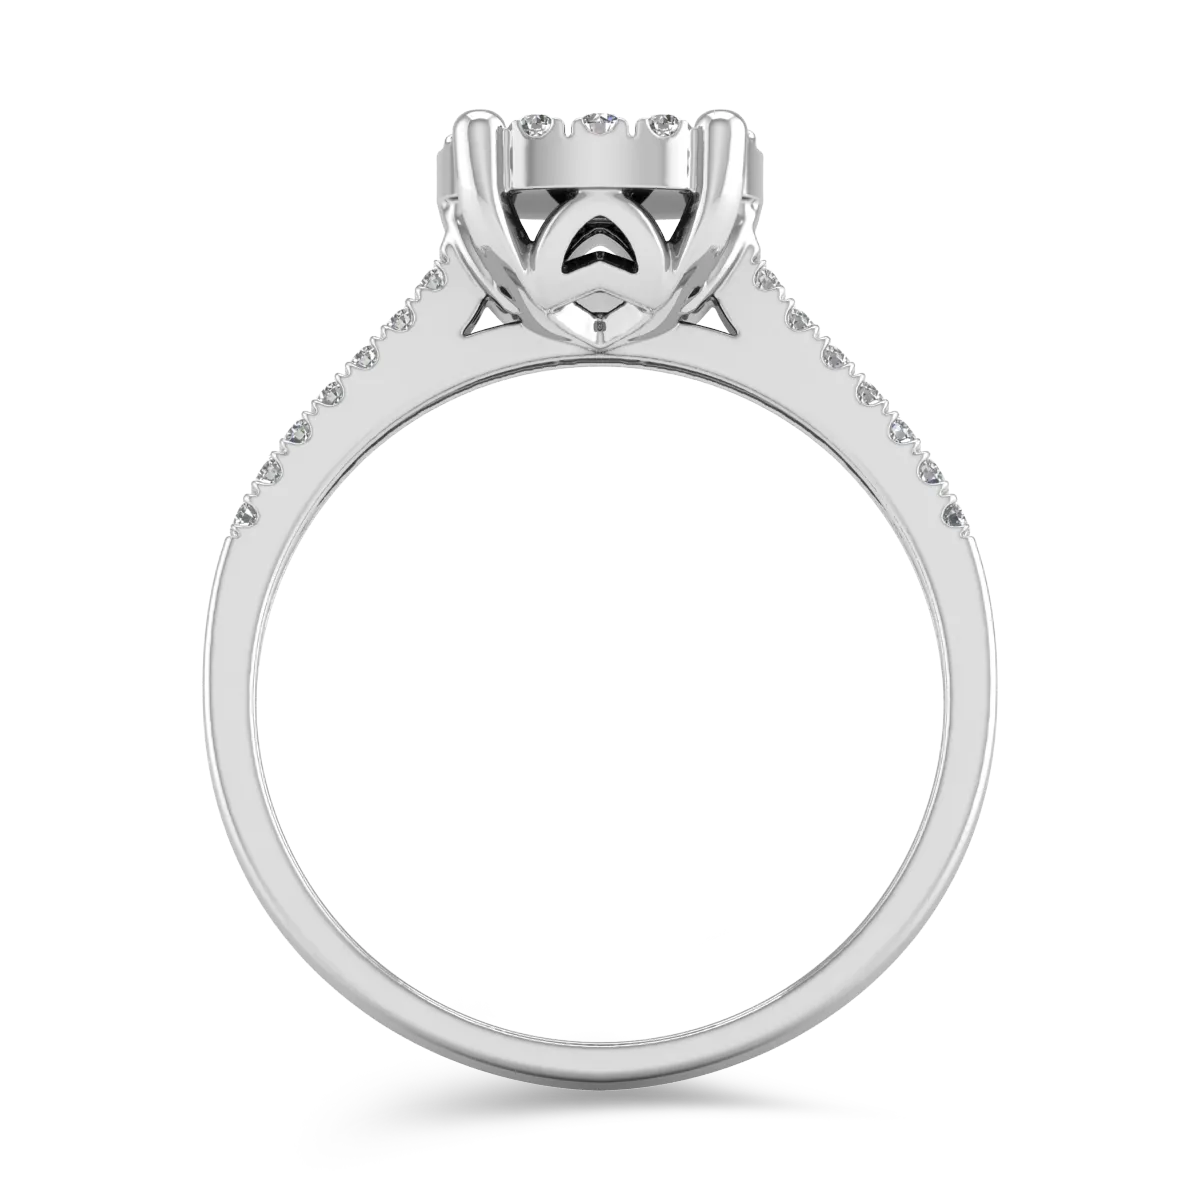 14K white gold engagement ring with 0.44ct diamonds